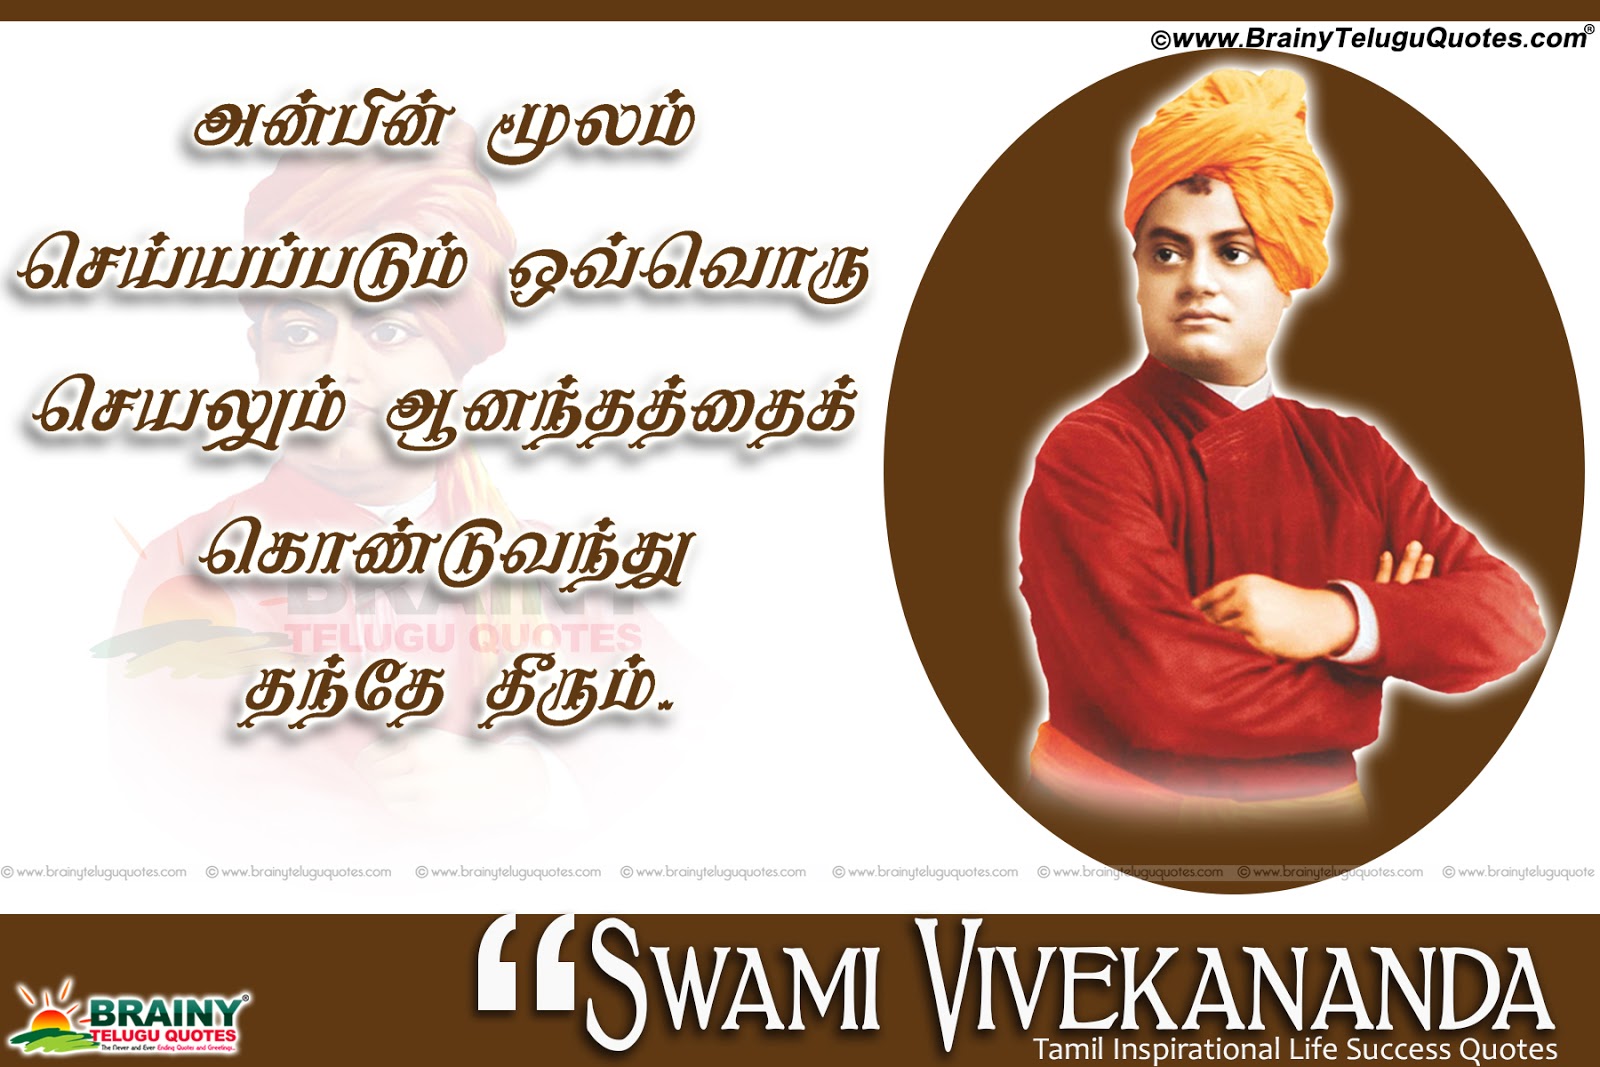 Great People Golden Words in Tamil Font Online | BrainyTeluguQuotes